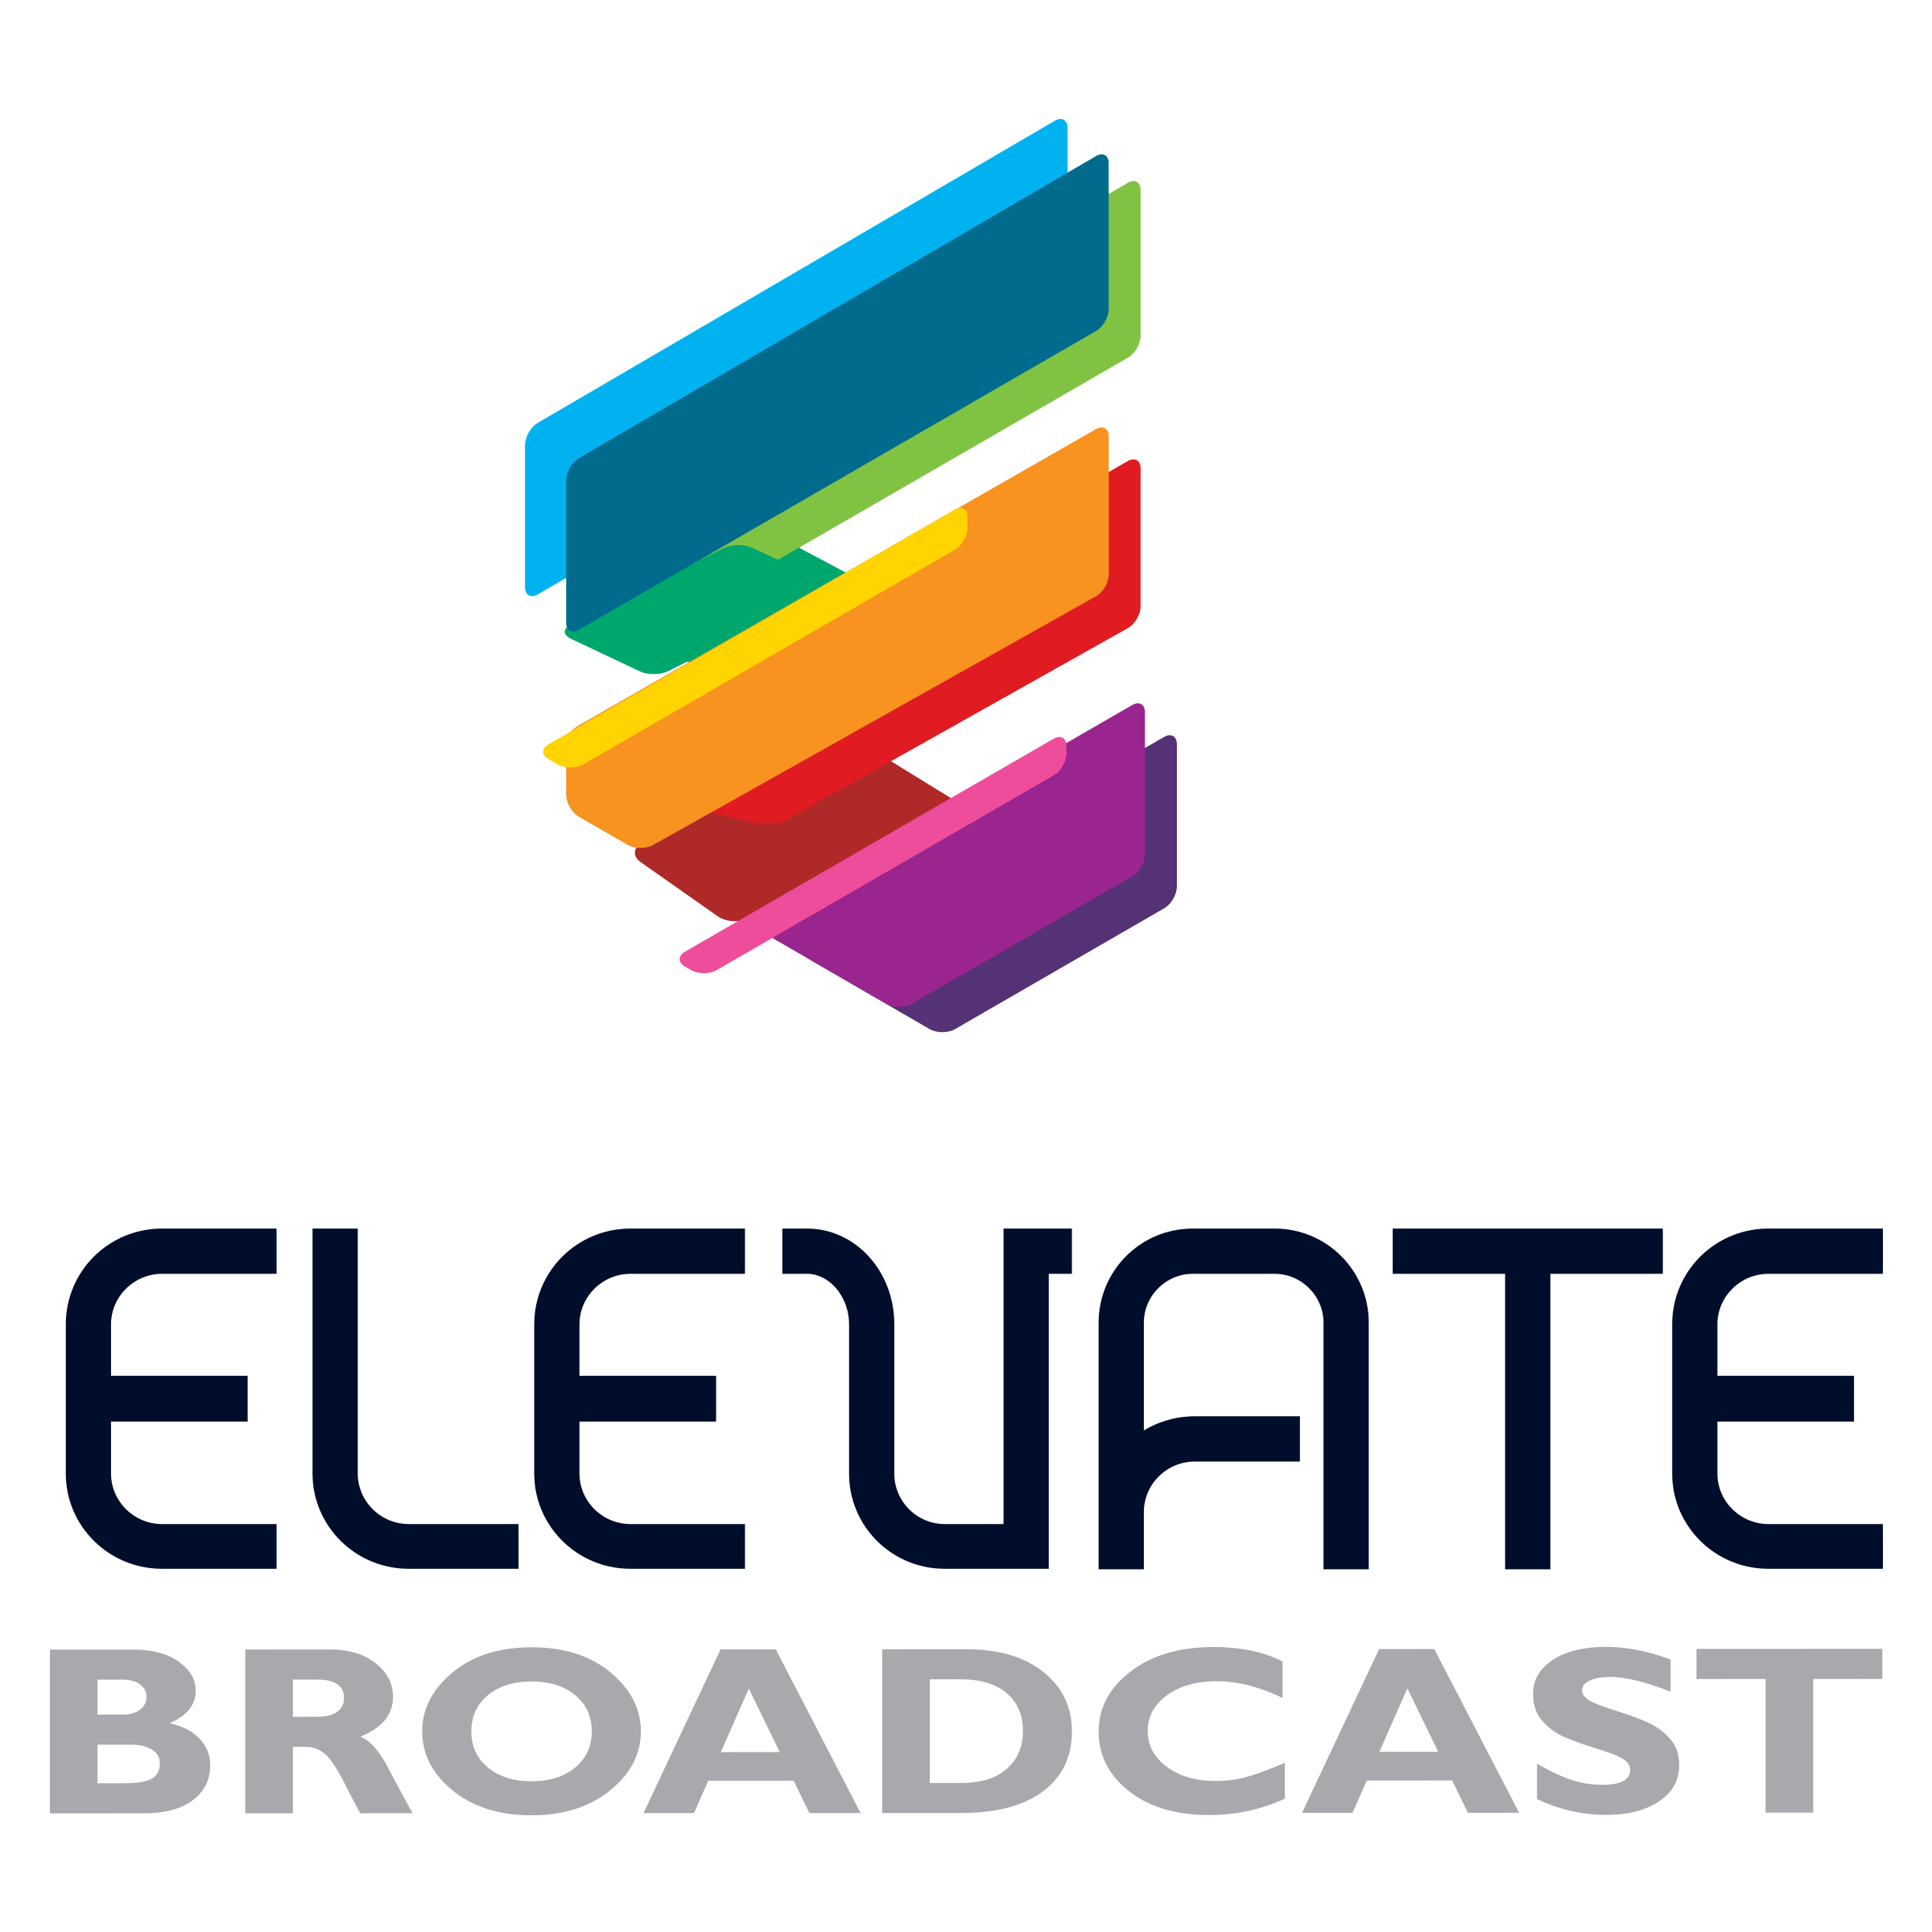 Broadcast Logo - Elevate Broadcast | Consulting, Product Supply & System Integration